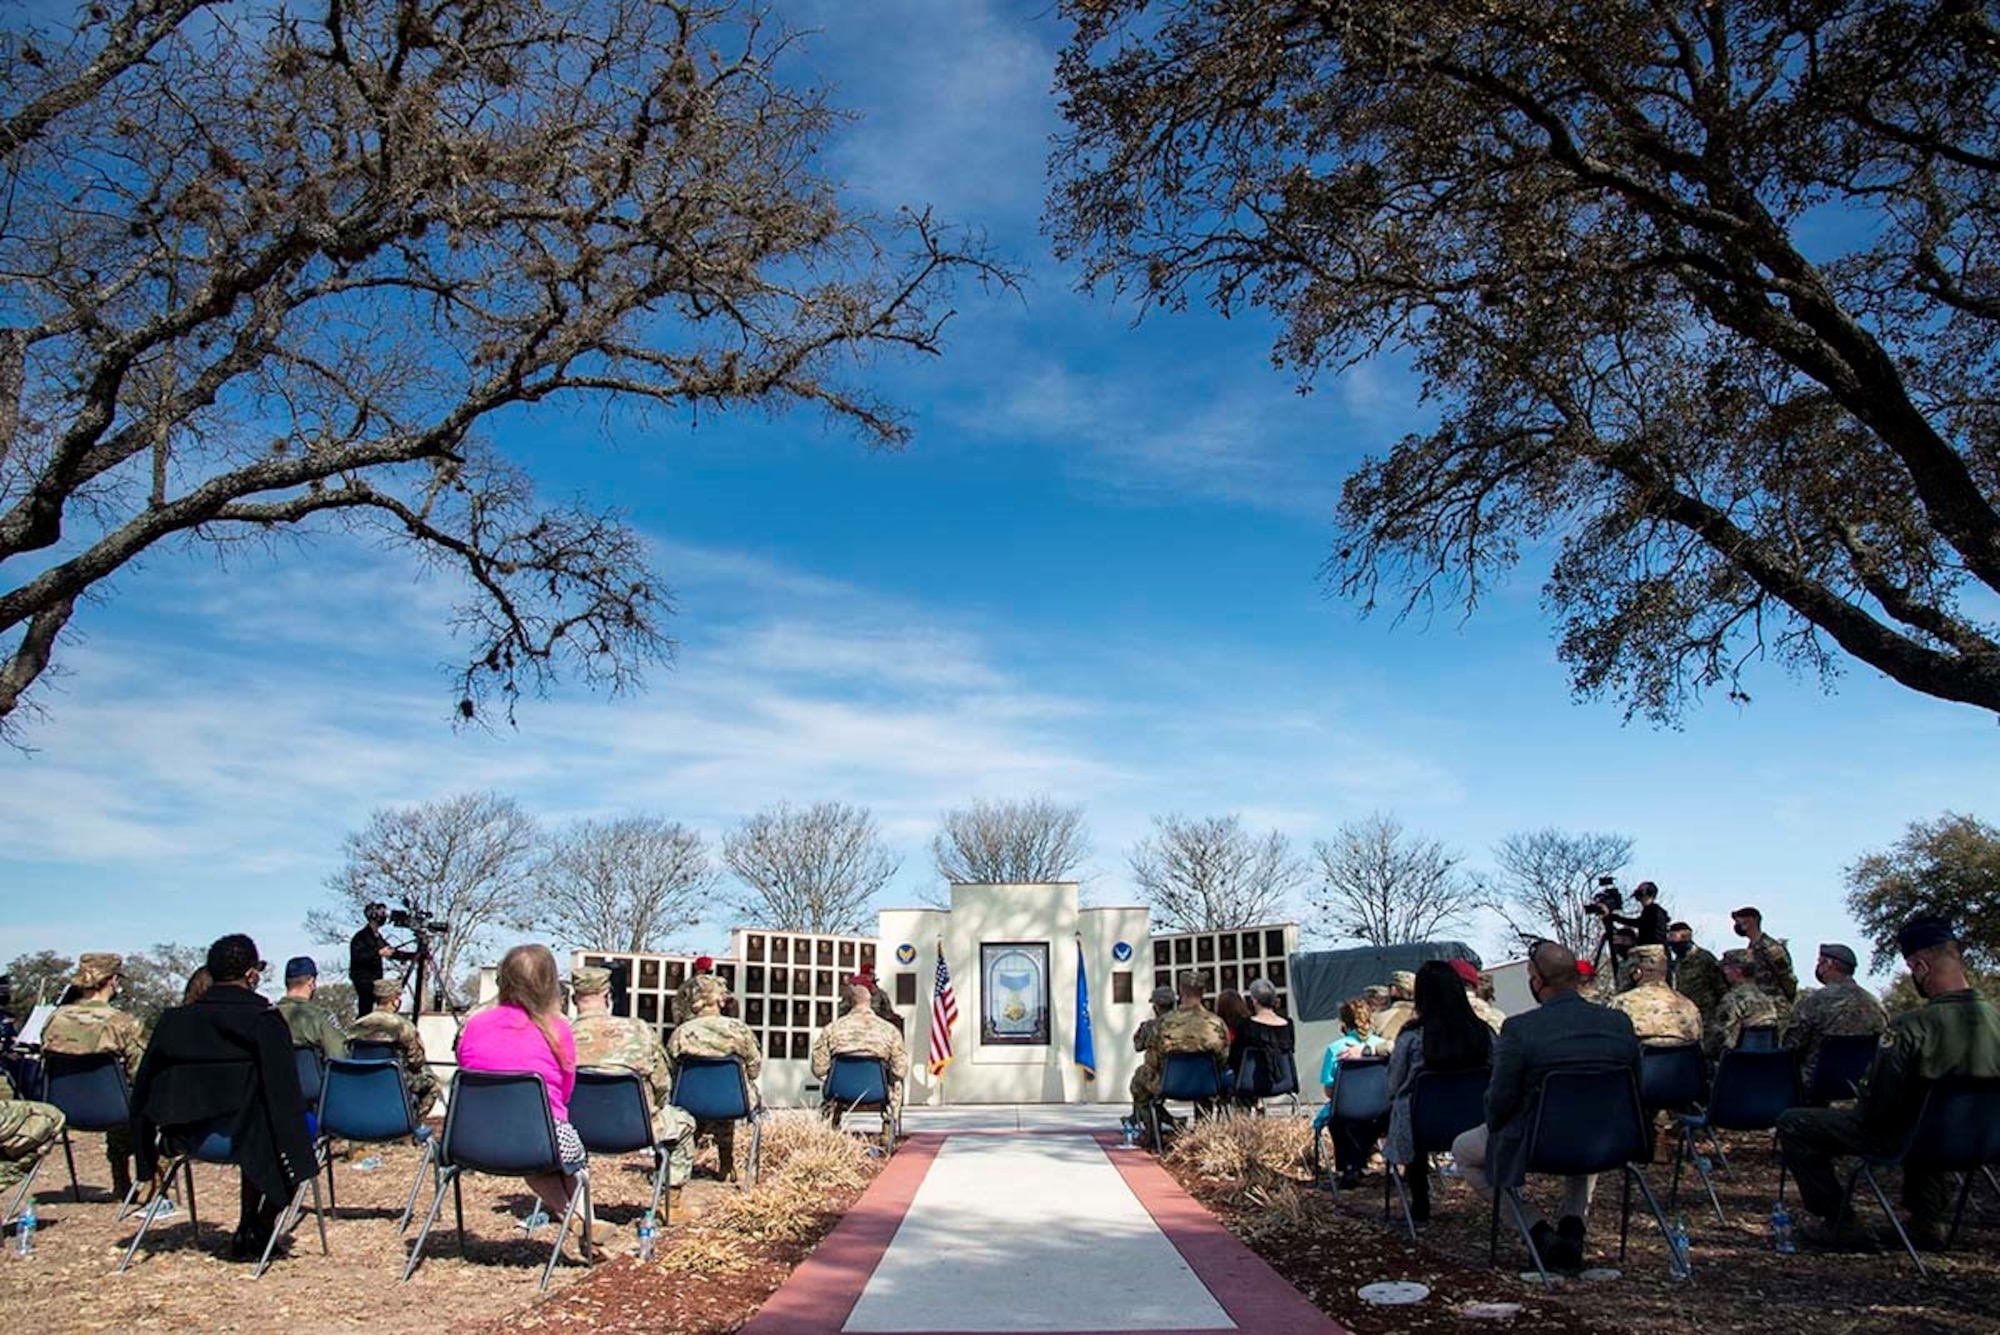 Members of the Joint Base San Antonio and the Special Warfare Training Wing come together to honor Medal of Honor recipient Master Sgt. John Chapman during a Medal of Honor plaque unveiling ceremony at Airmen’s Heritage Park at Joint Base San Antonio-Randolph March 4, 2021.